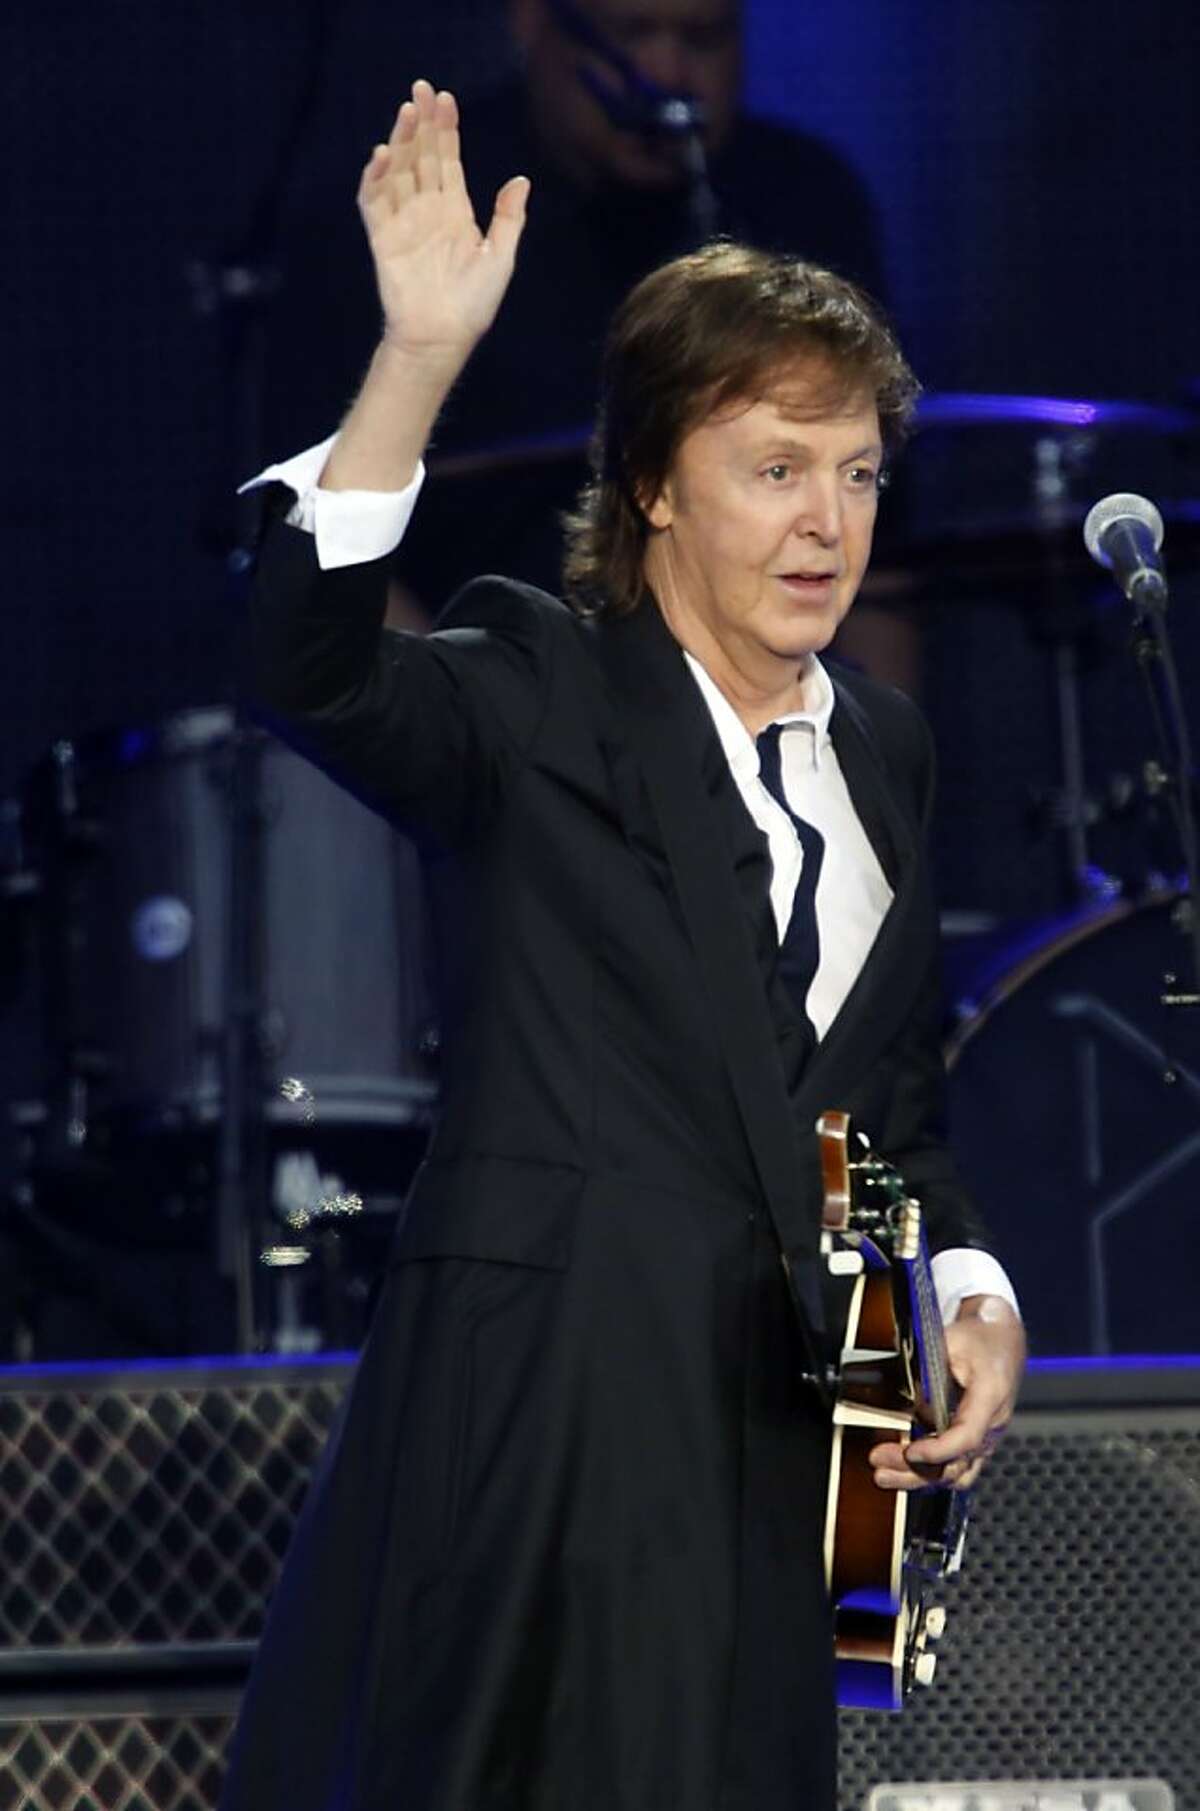 Paul McCartney greets thousands of fans on the Lands End stage during the first day of the Outside Lands music festival in Golden Gate Park in San Francisco, Calif. on August 9, 2013.